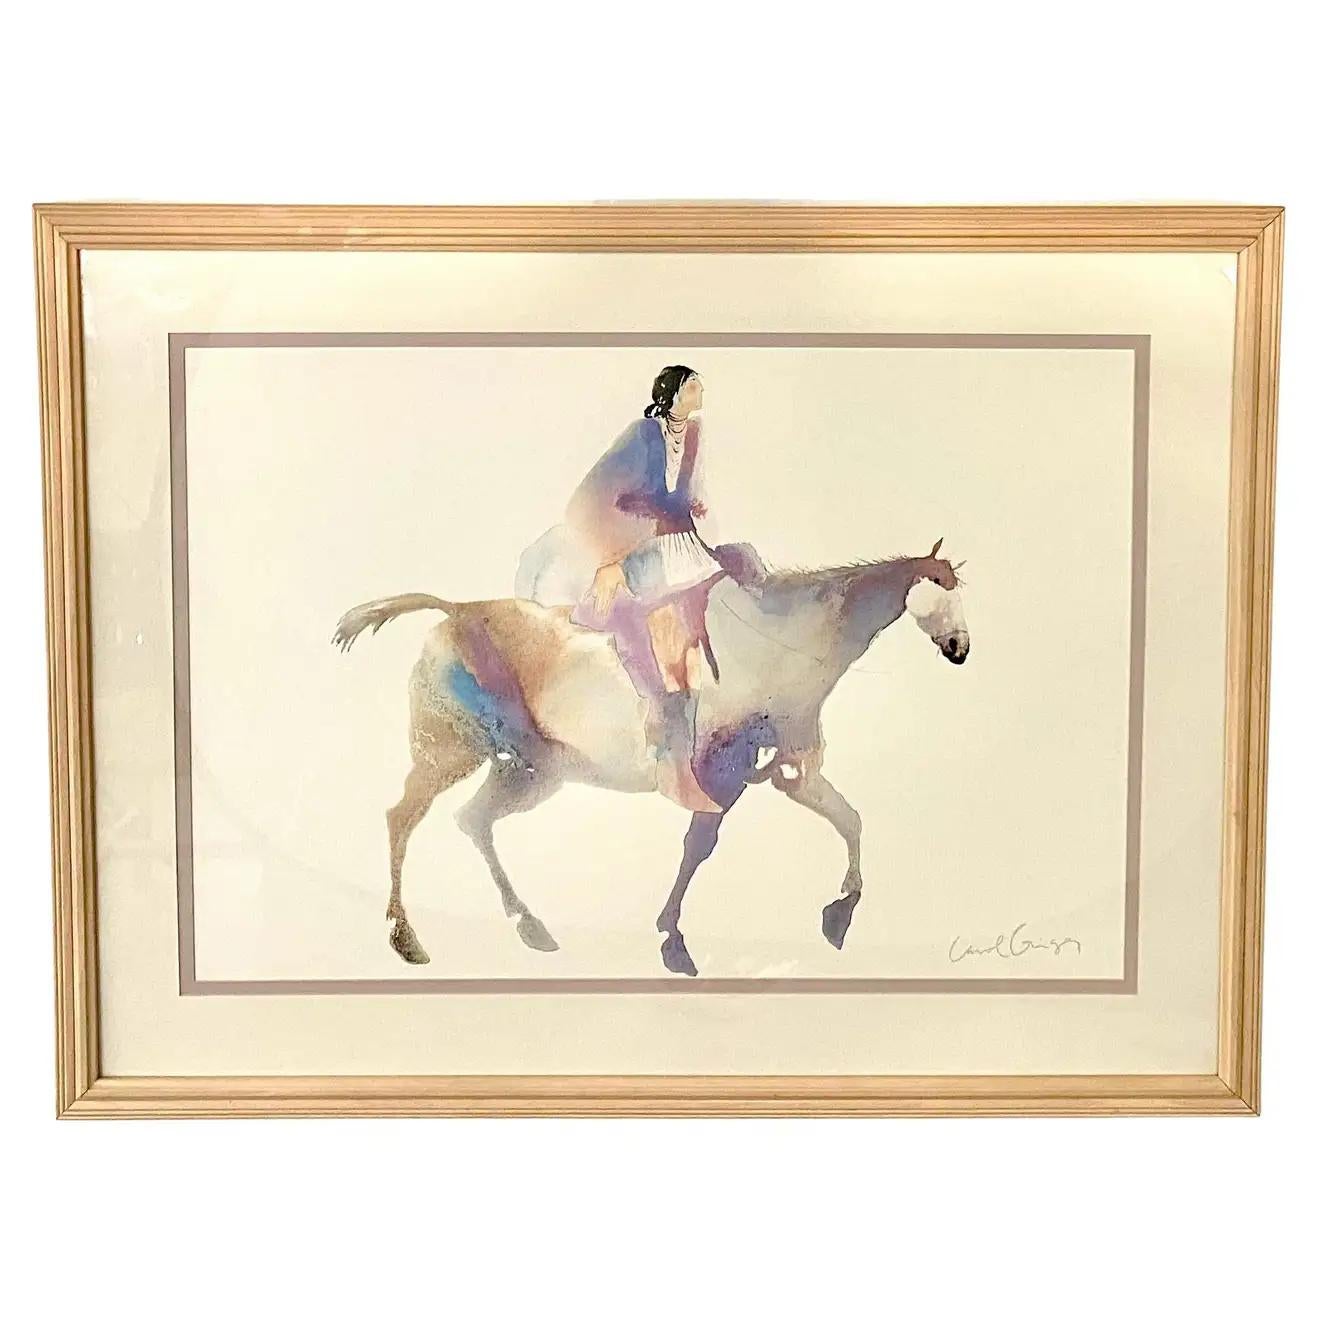 Carol Grigg Animal Art - Native American Watercolor Lithograph by Carole Greg, Limited Edition, Signed 